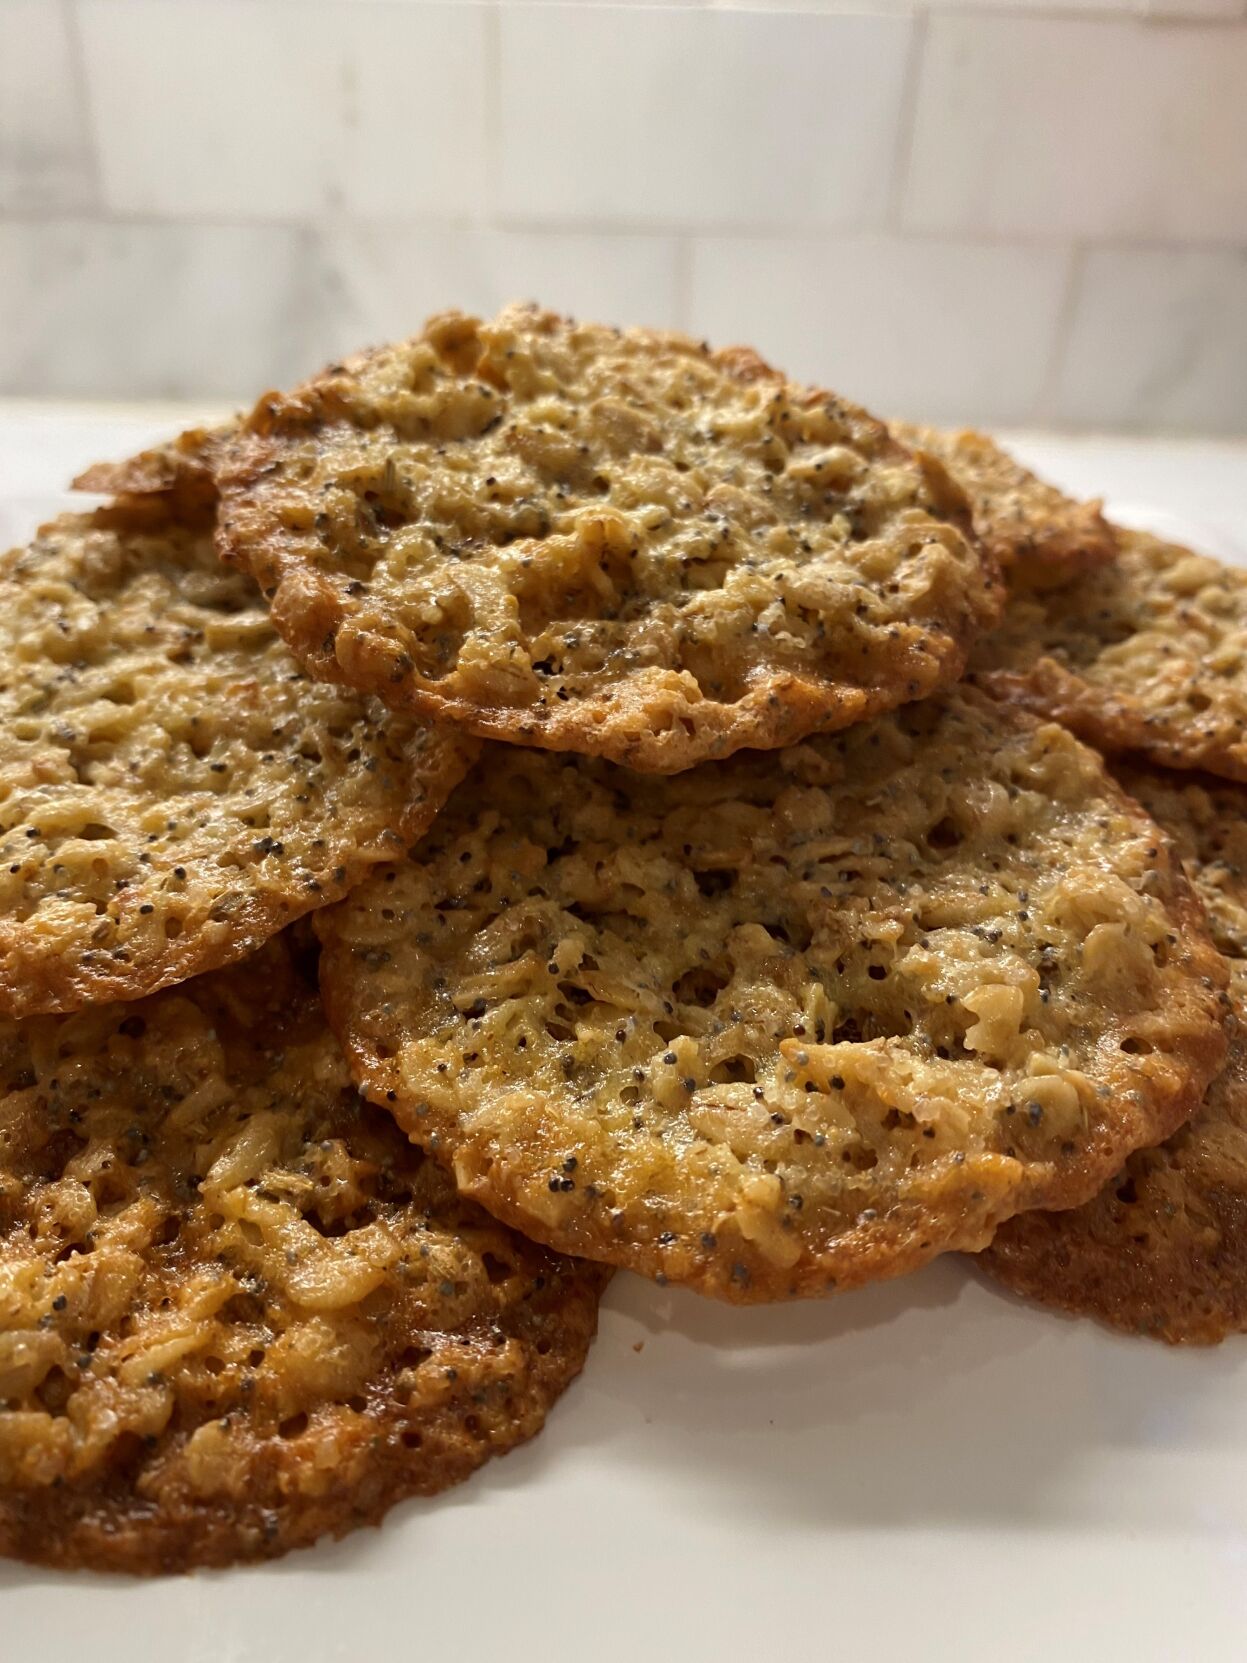 Make delicious and simple grain bowls, oatmeal cookies | Entertainment ...